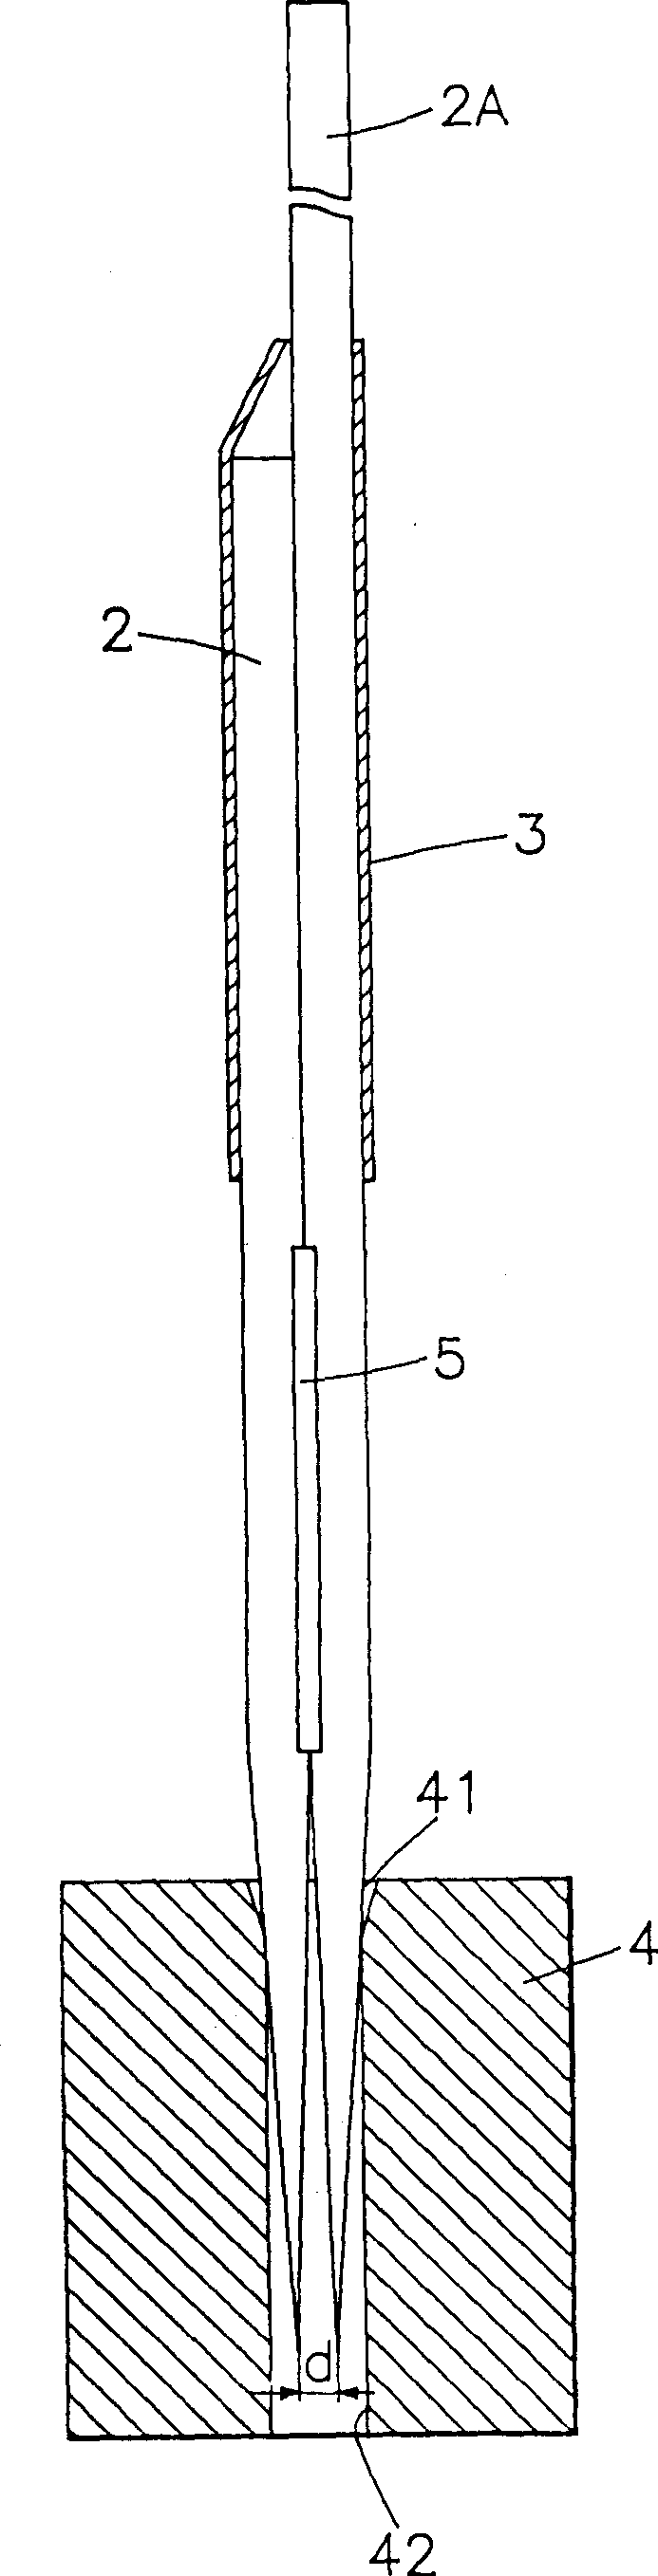 Method for combining multiple brow-streaking needles into a whole